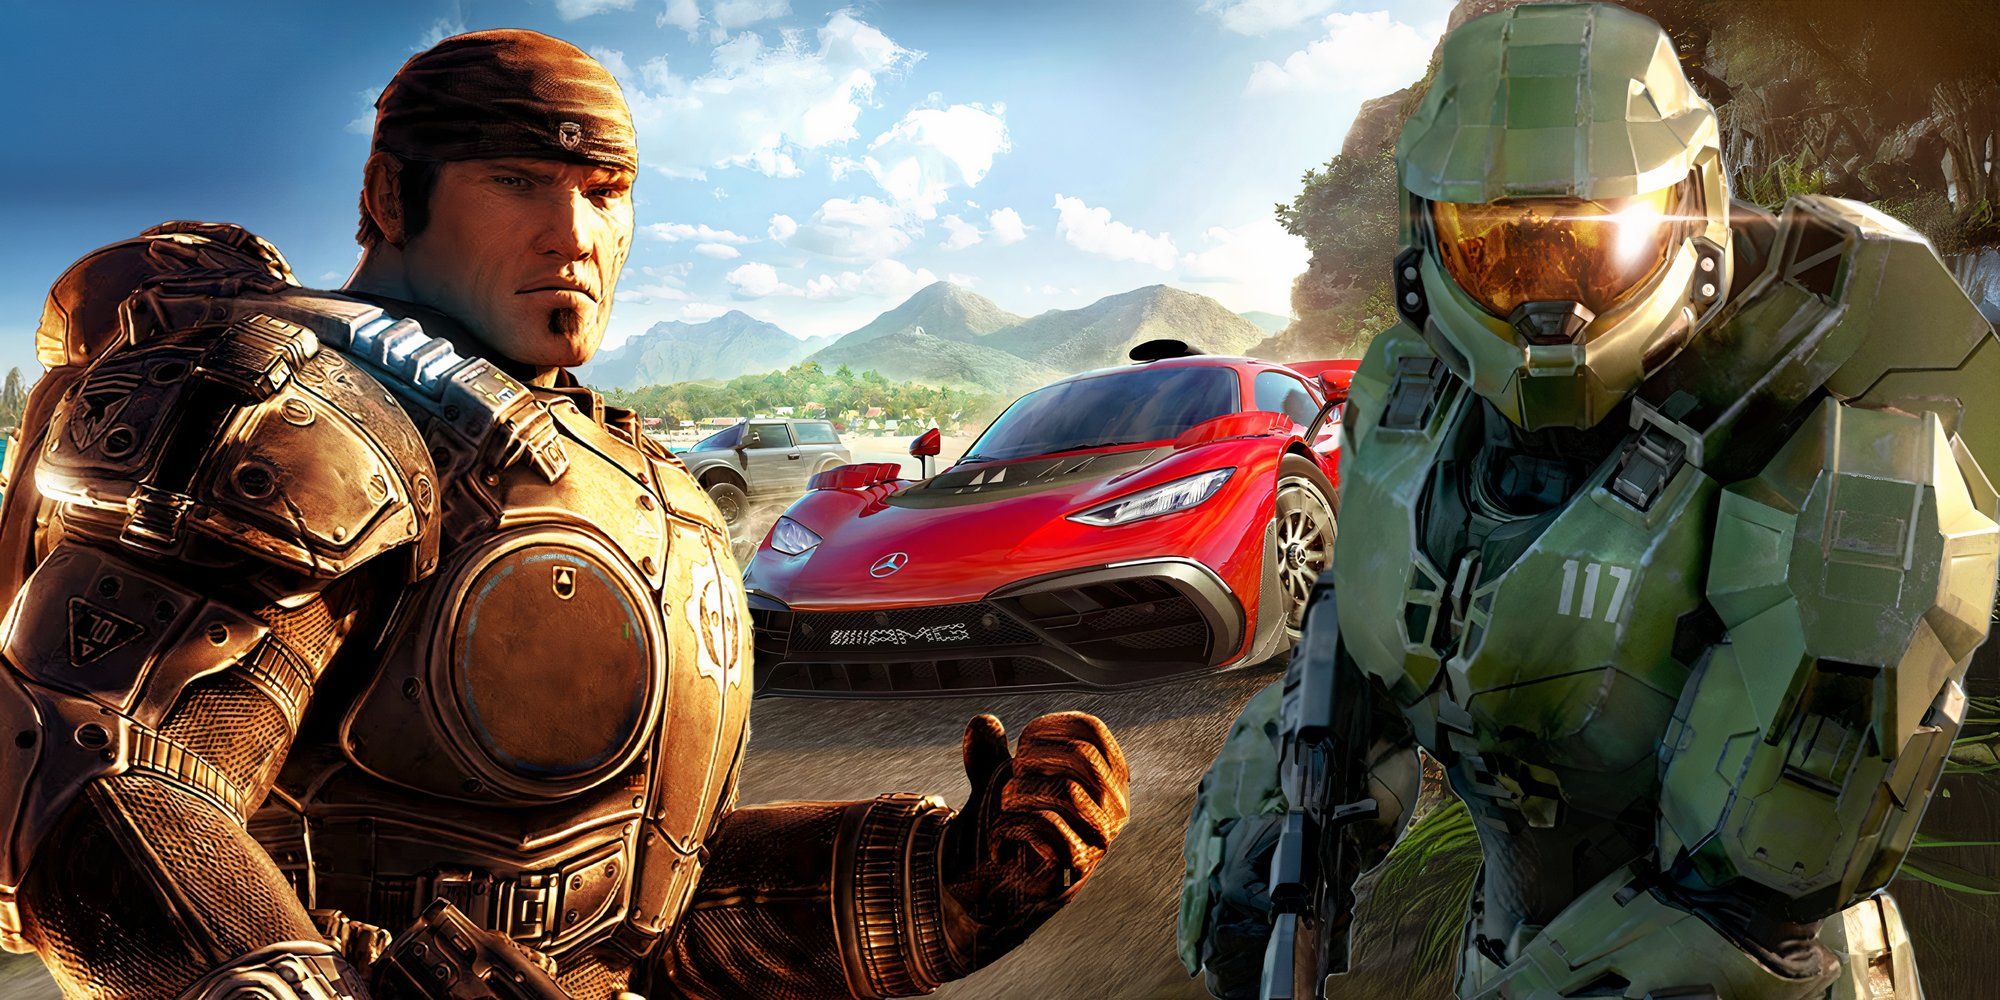 Halo, Forza & Extra Xbox Exclusives Heading To PlayStation, Report Claims